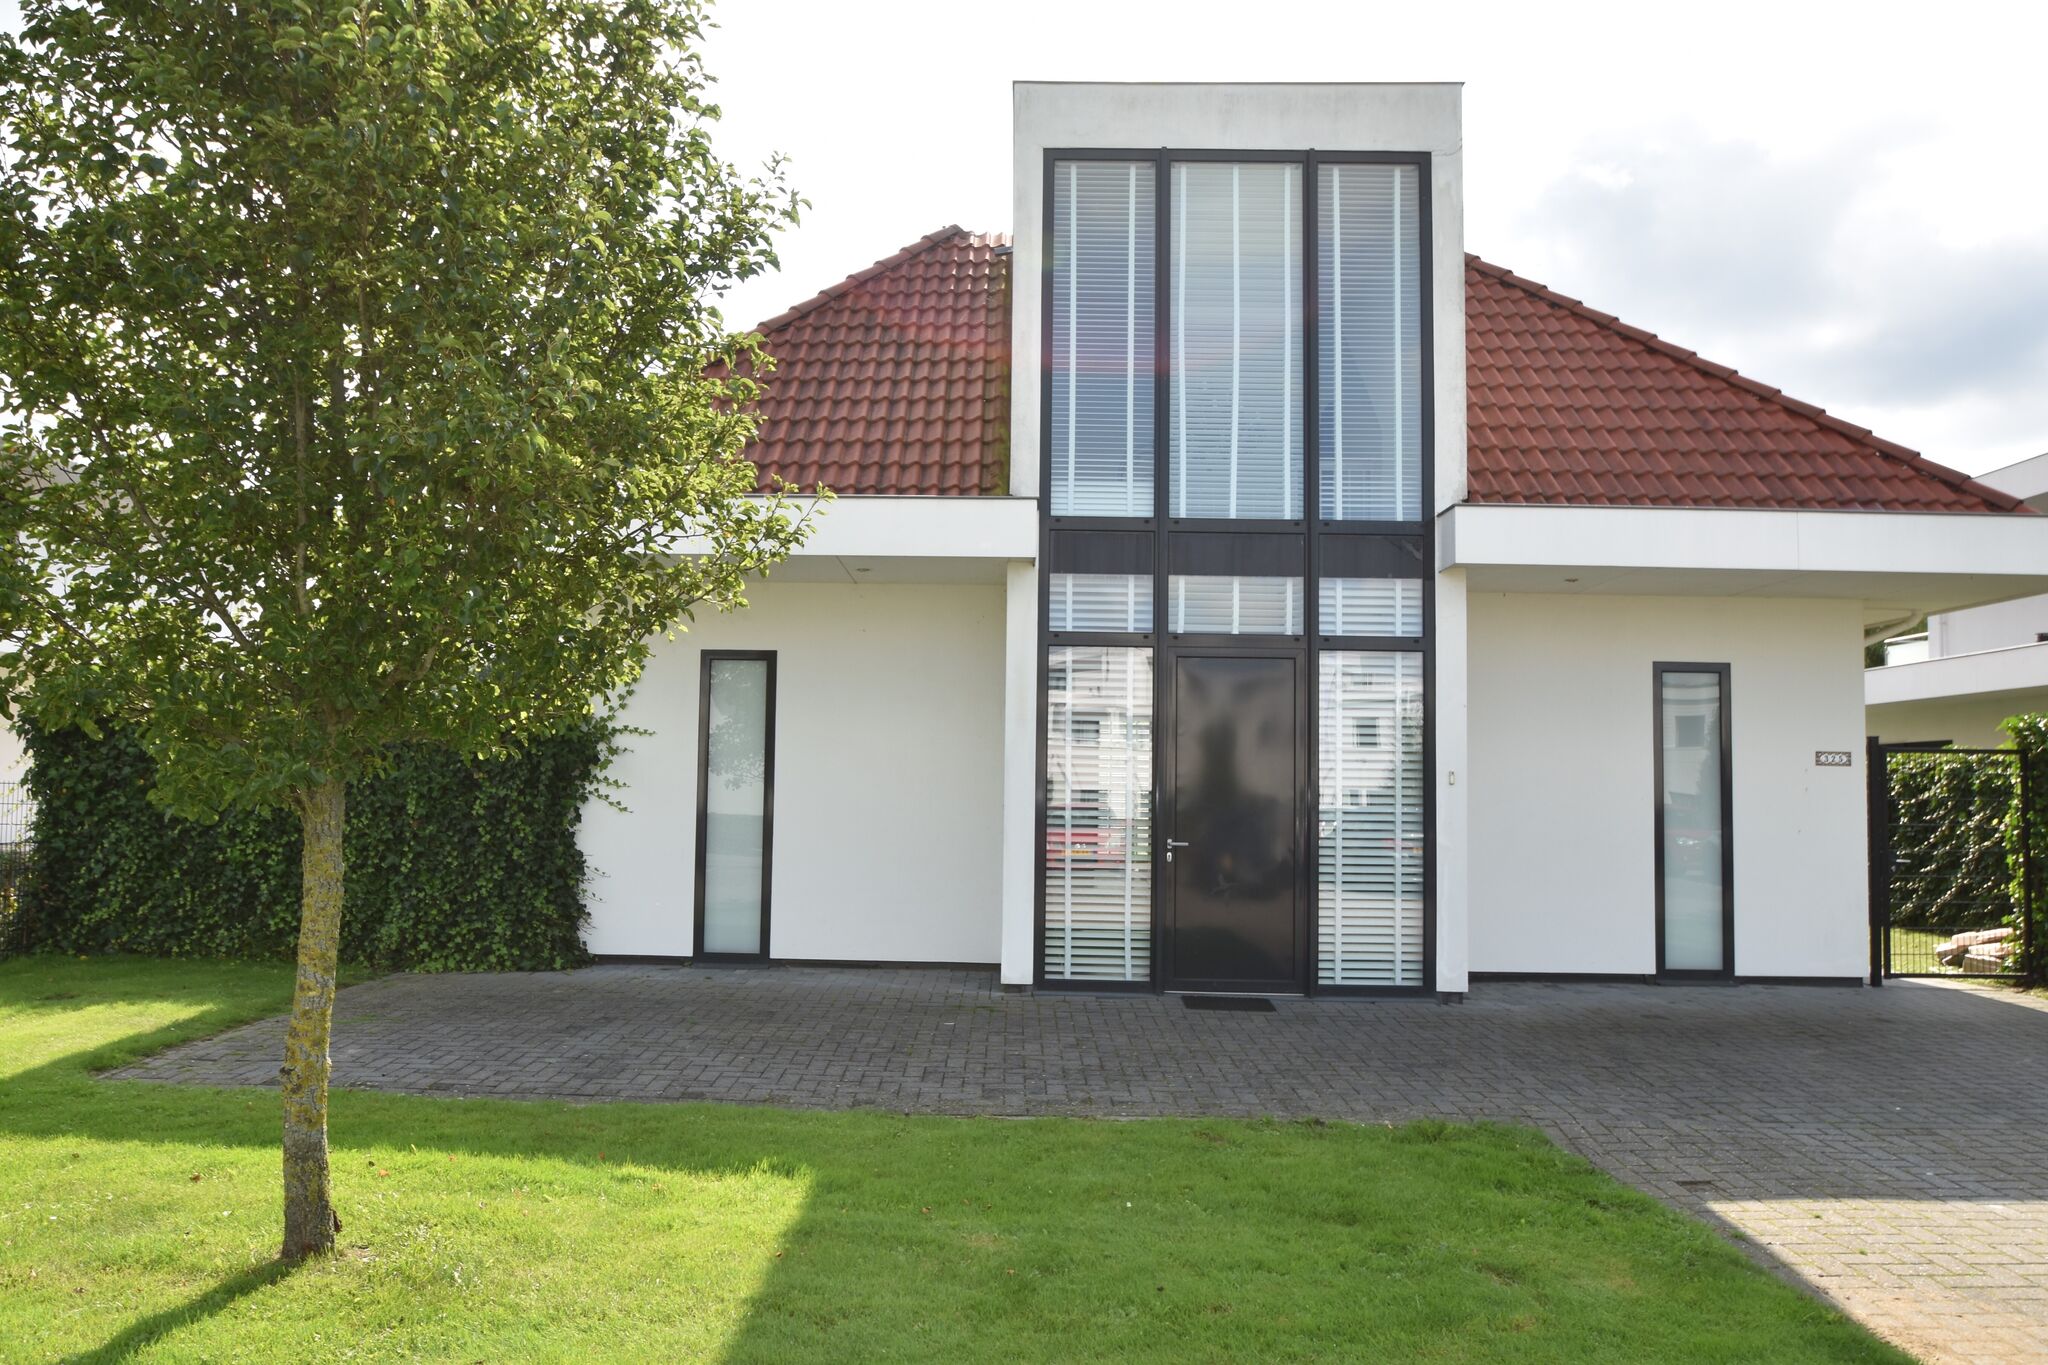 Holiday Home in Zeewolde with Jetty next to golf course